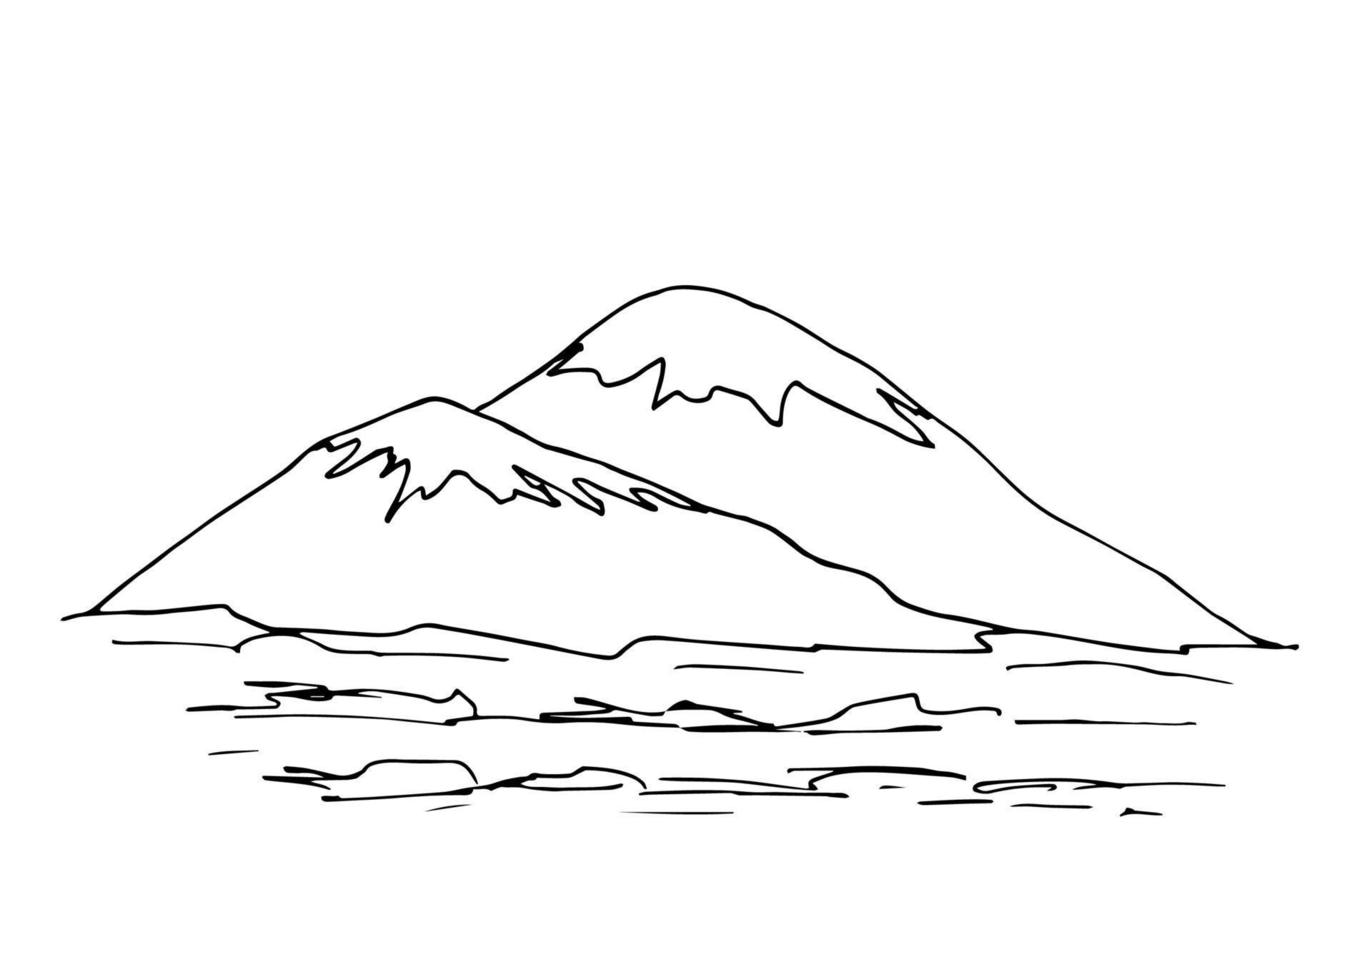 Mountain Hill Landscape Hand Drawn Vector Illustration Sketch Natural  Drawing Vintage Style Handdrawn Rocky Peaks Black And White Stock  Illustration  Download Image Now  iStock